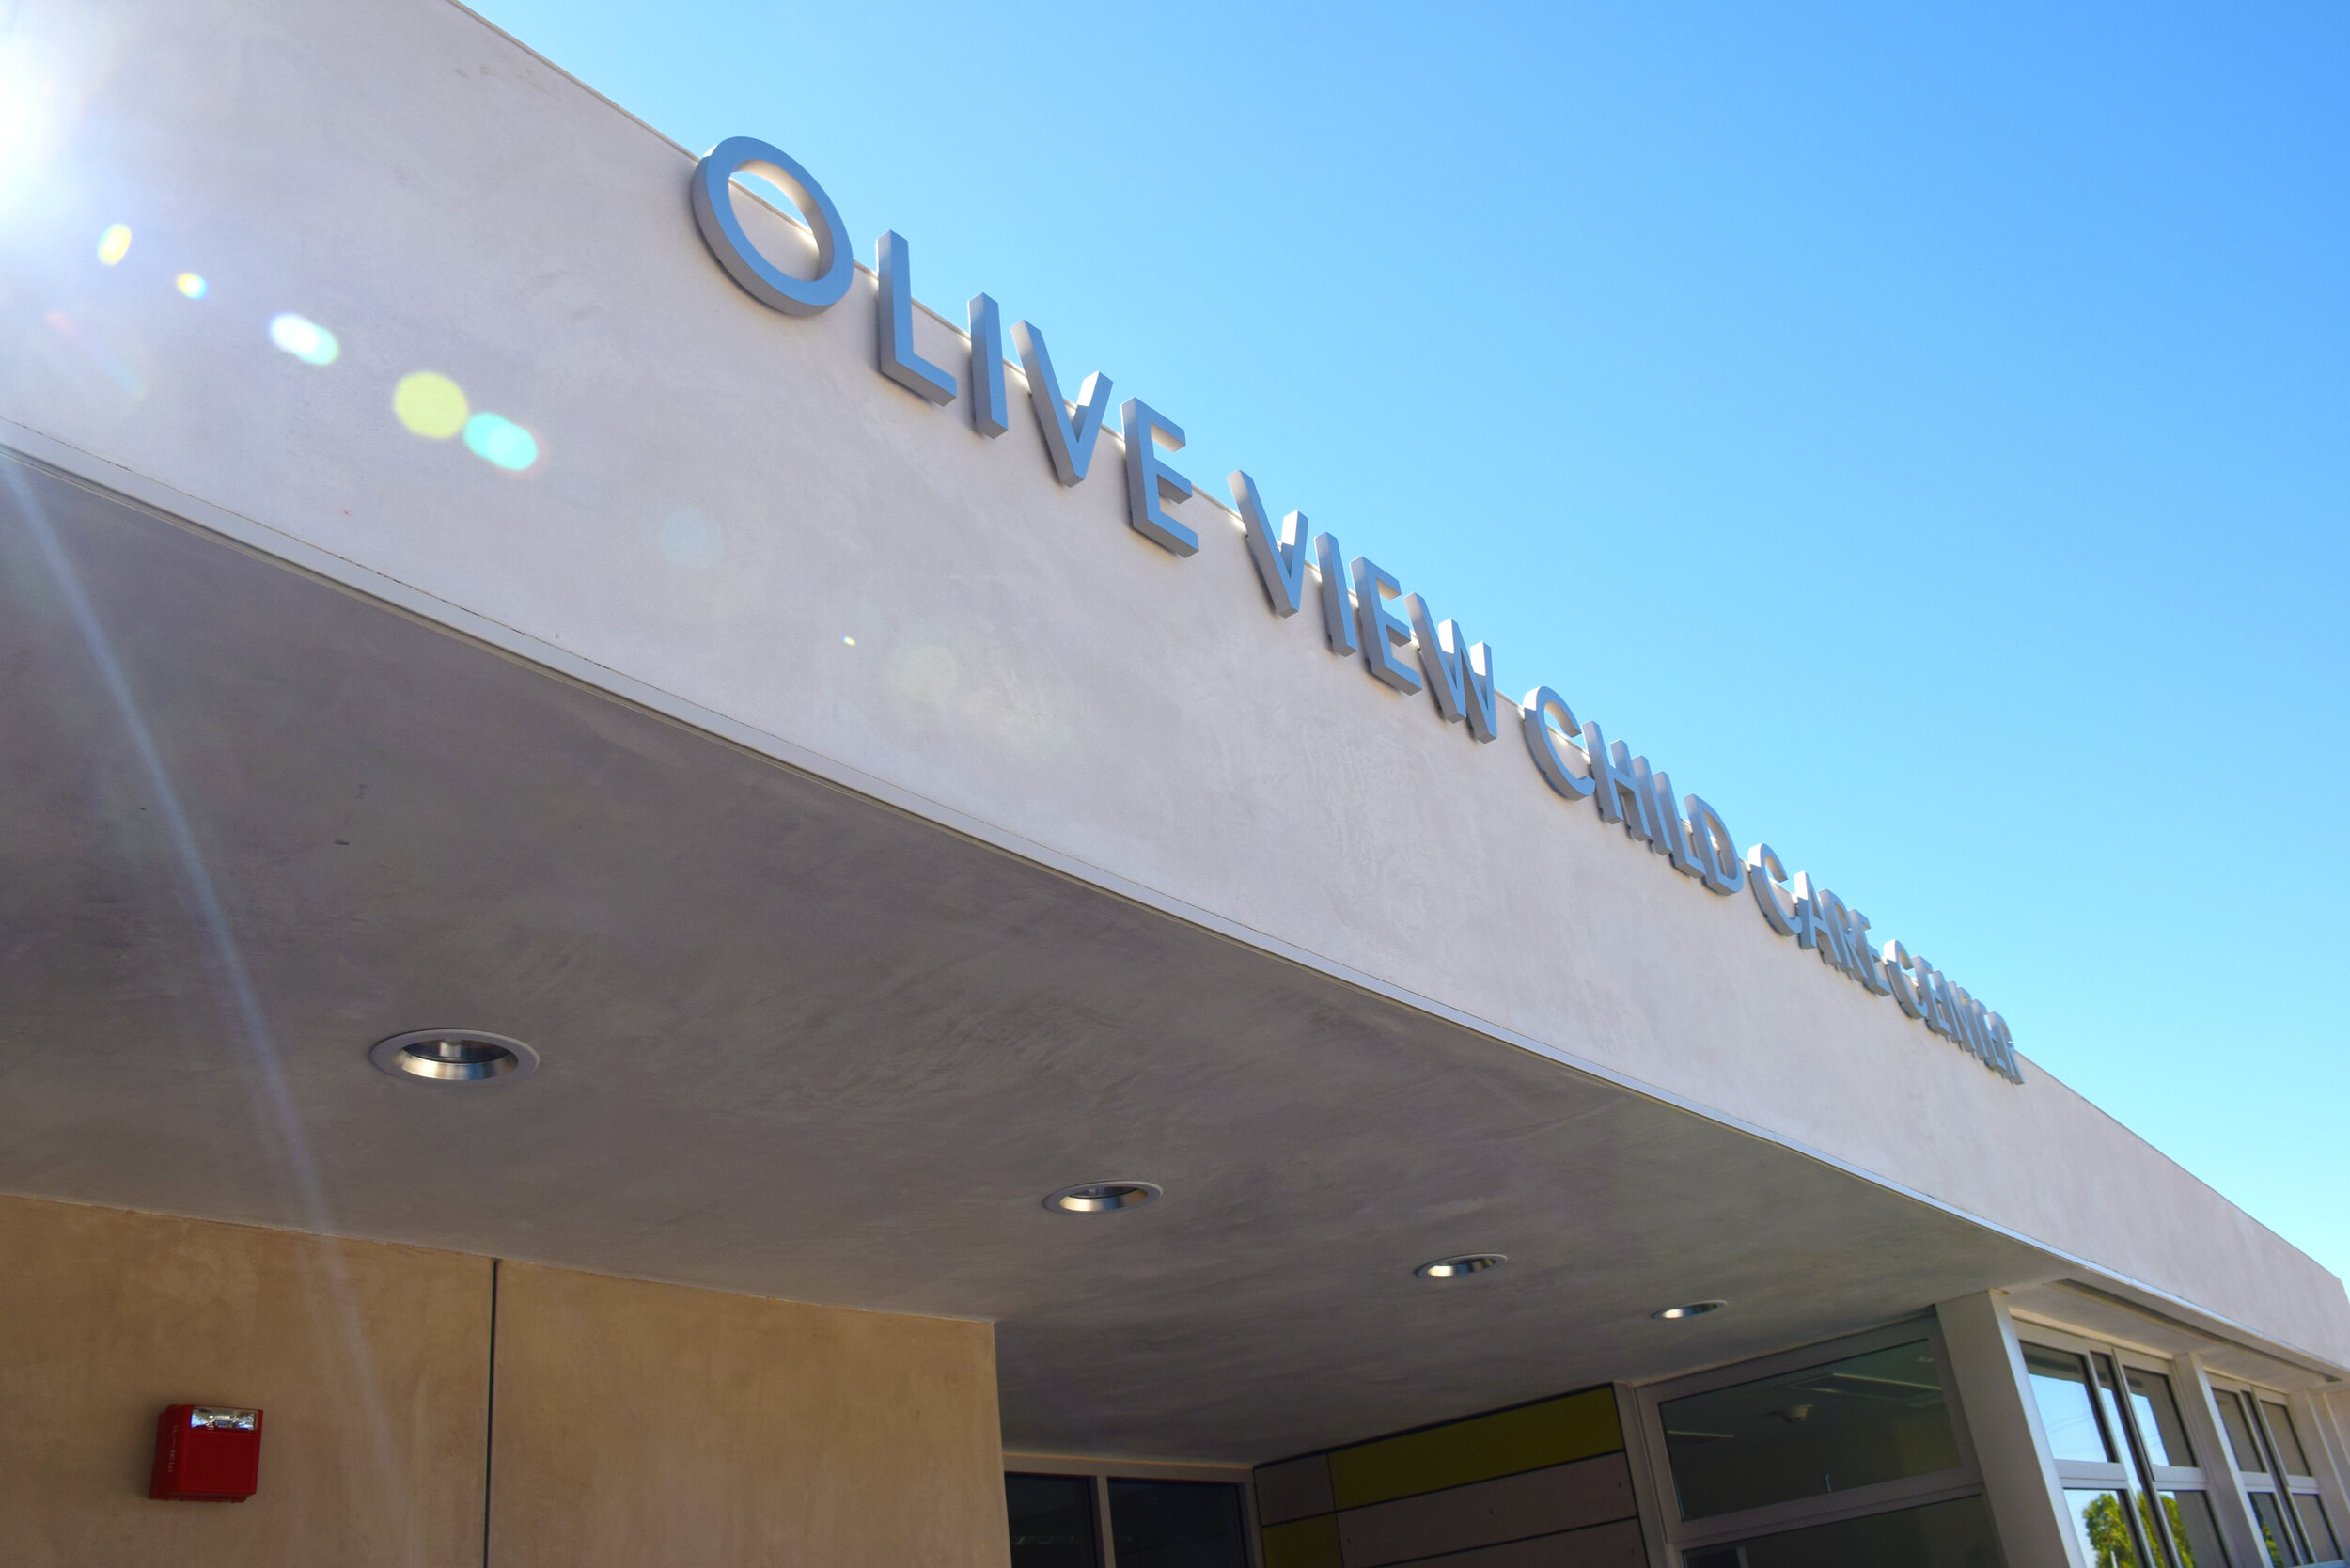 UCLA Olive View Child Care Center Building